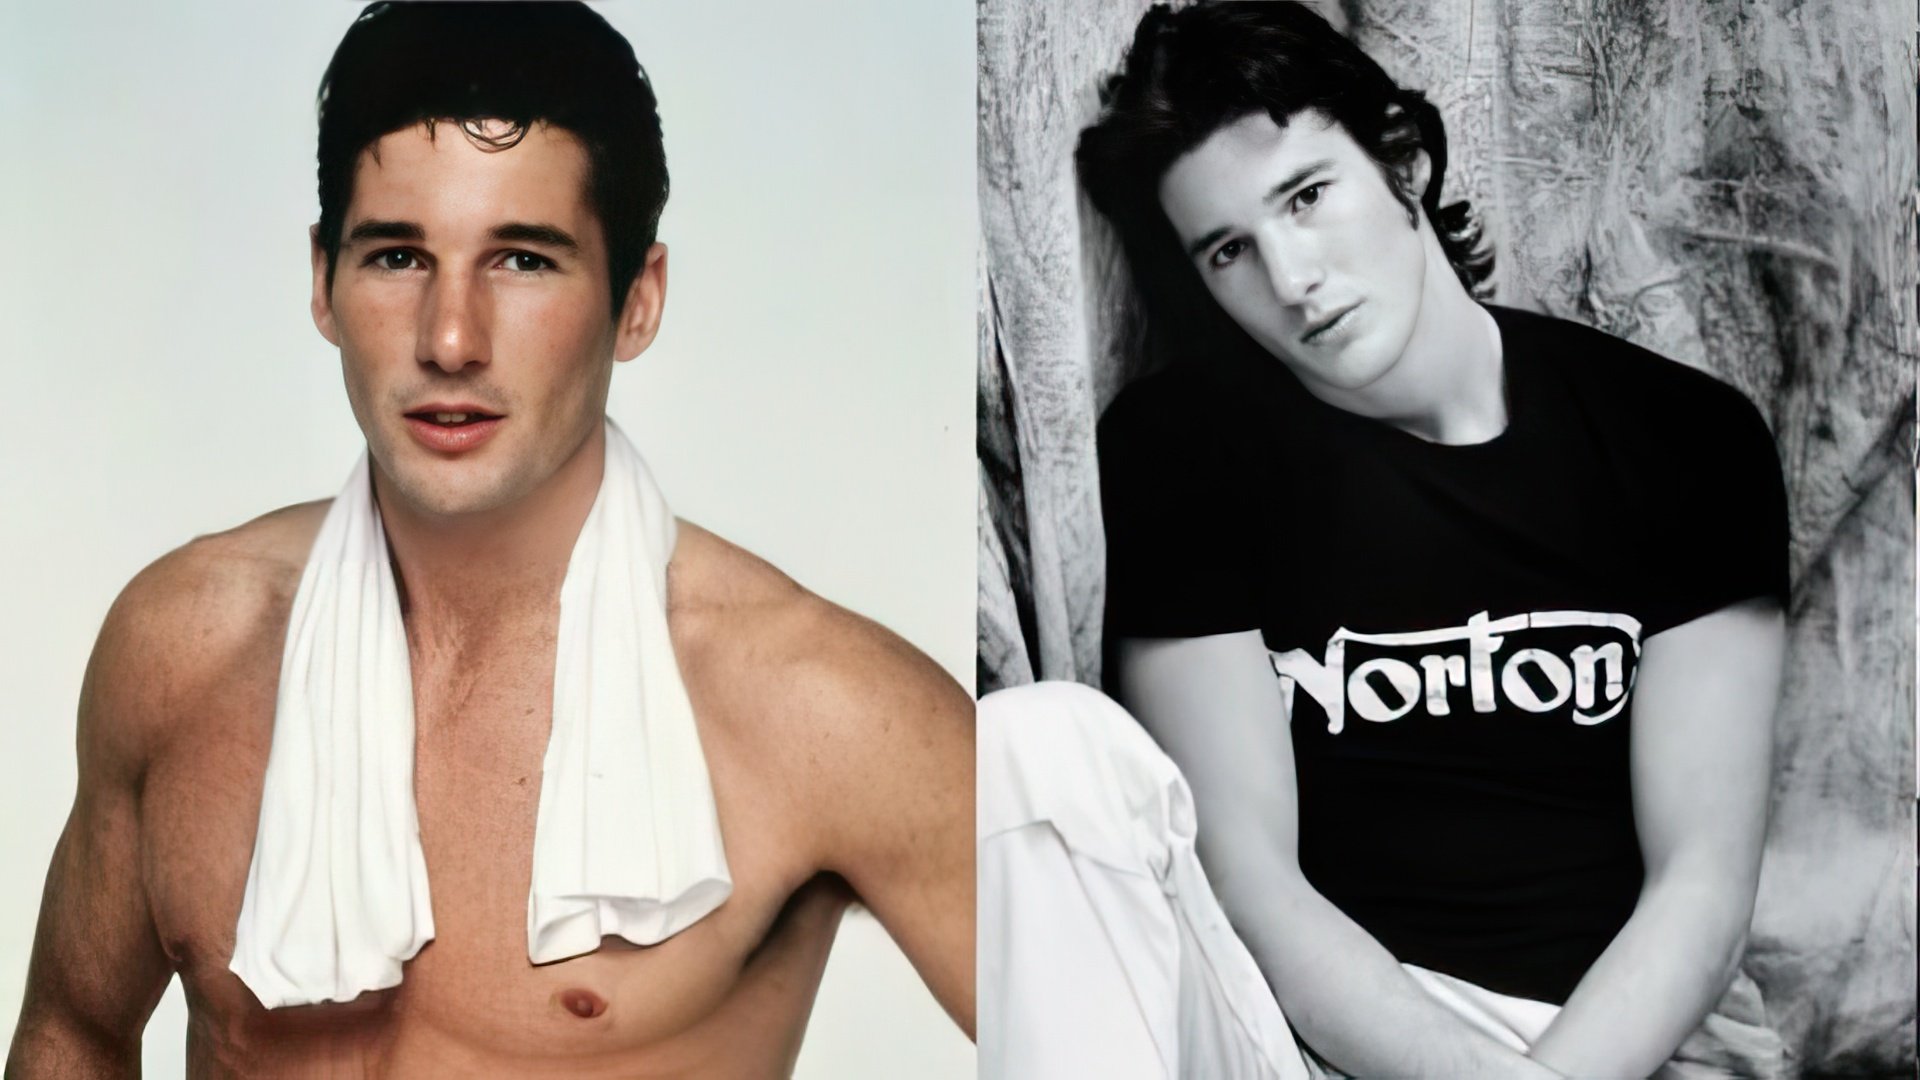 In youth Richard Gere was very introverted